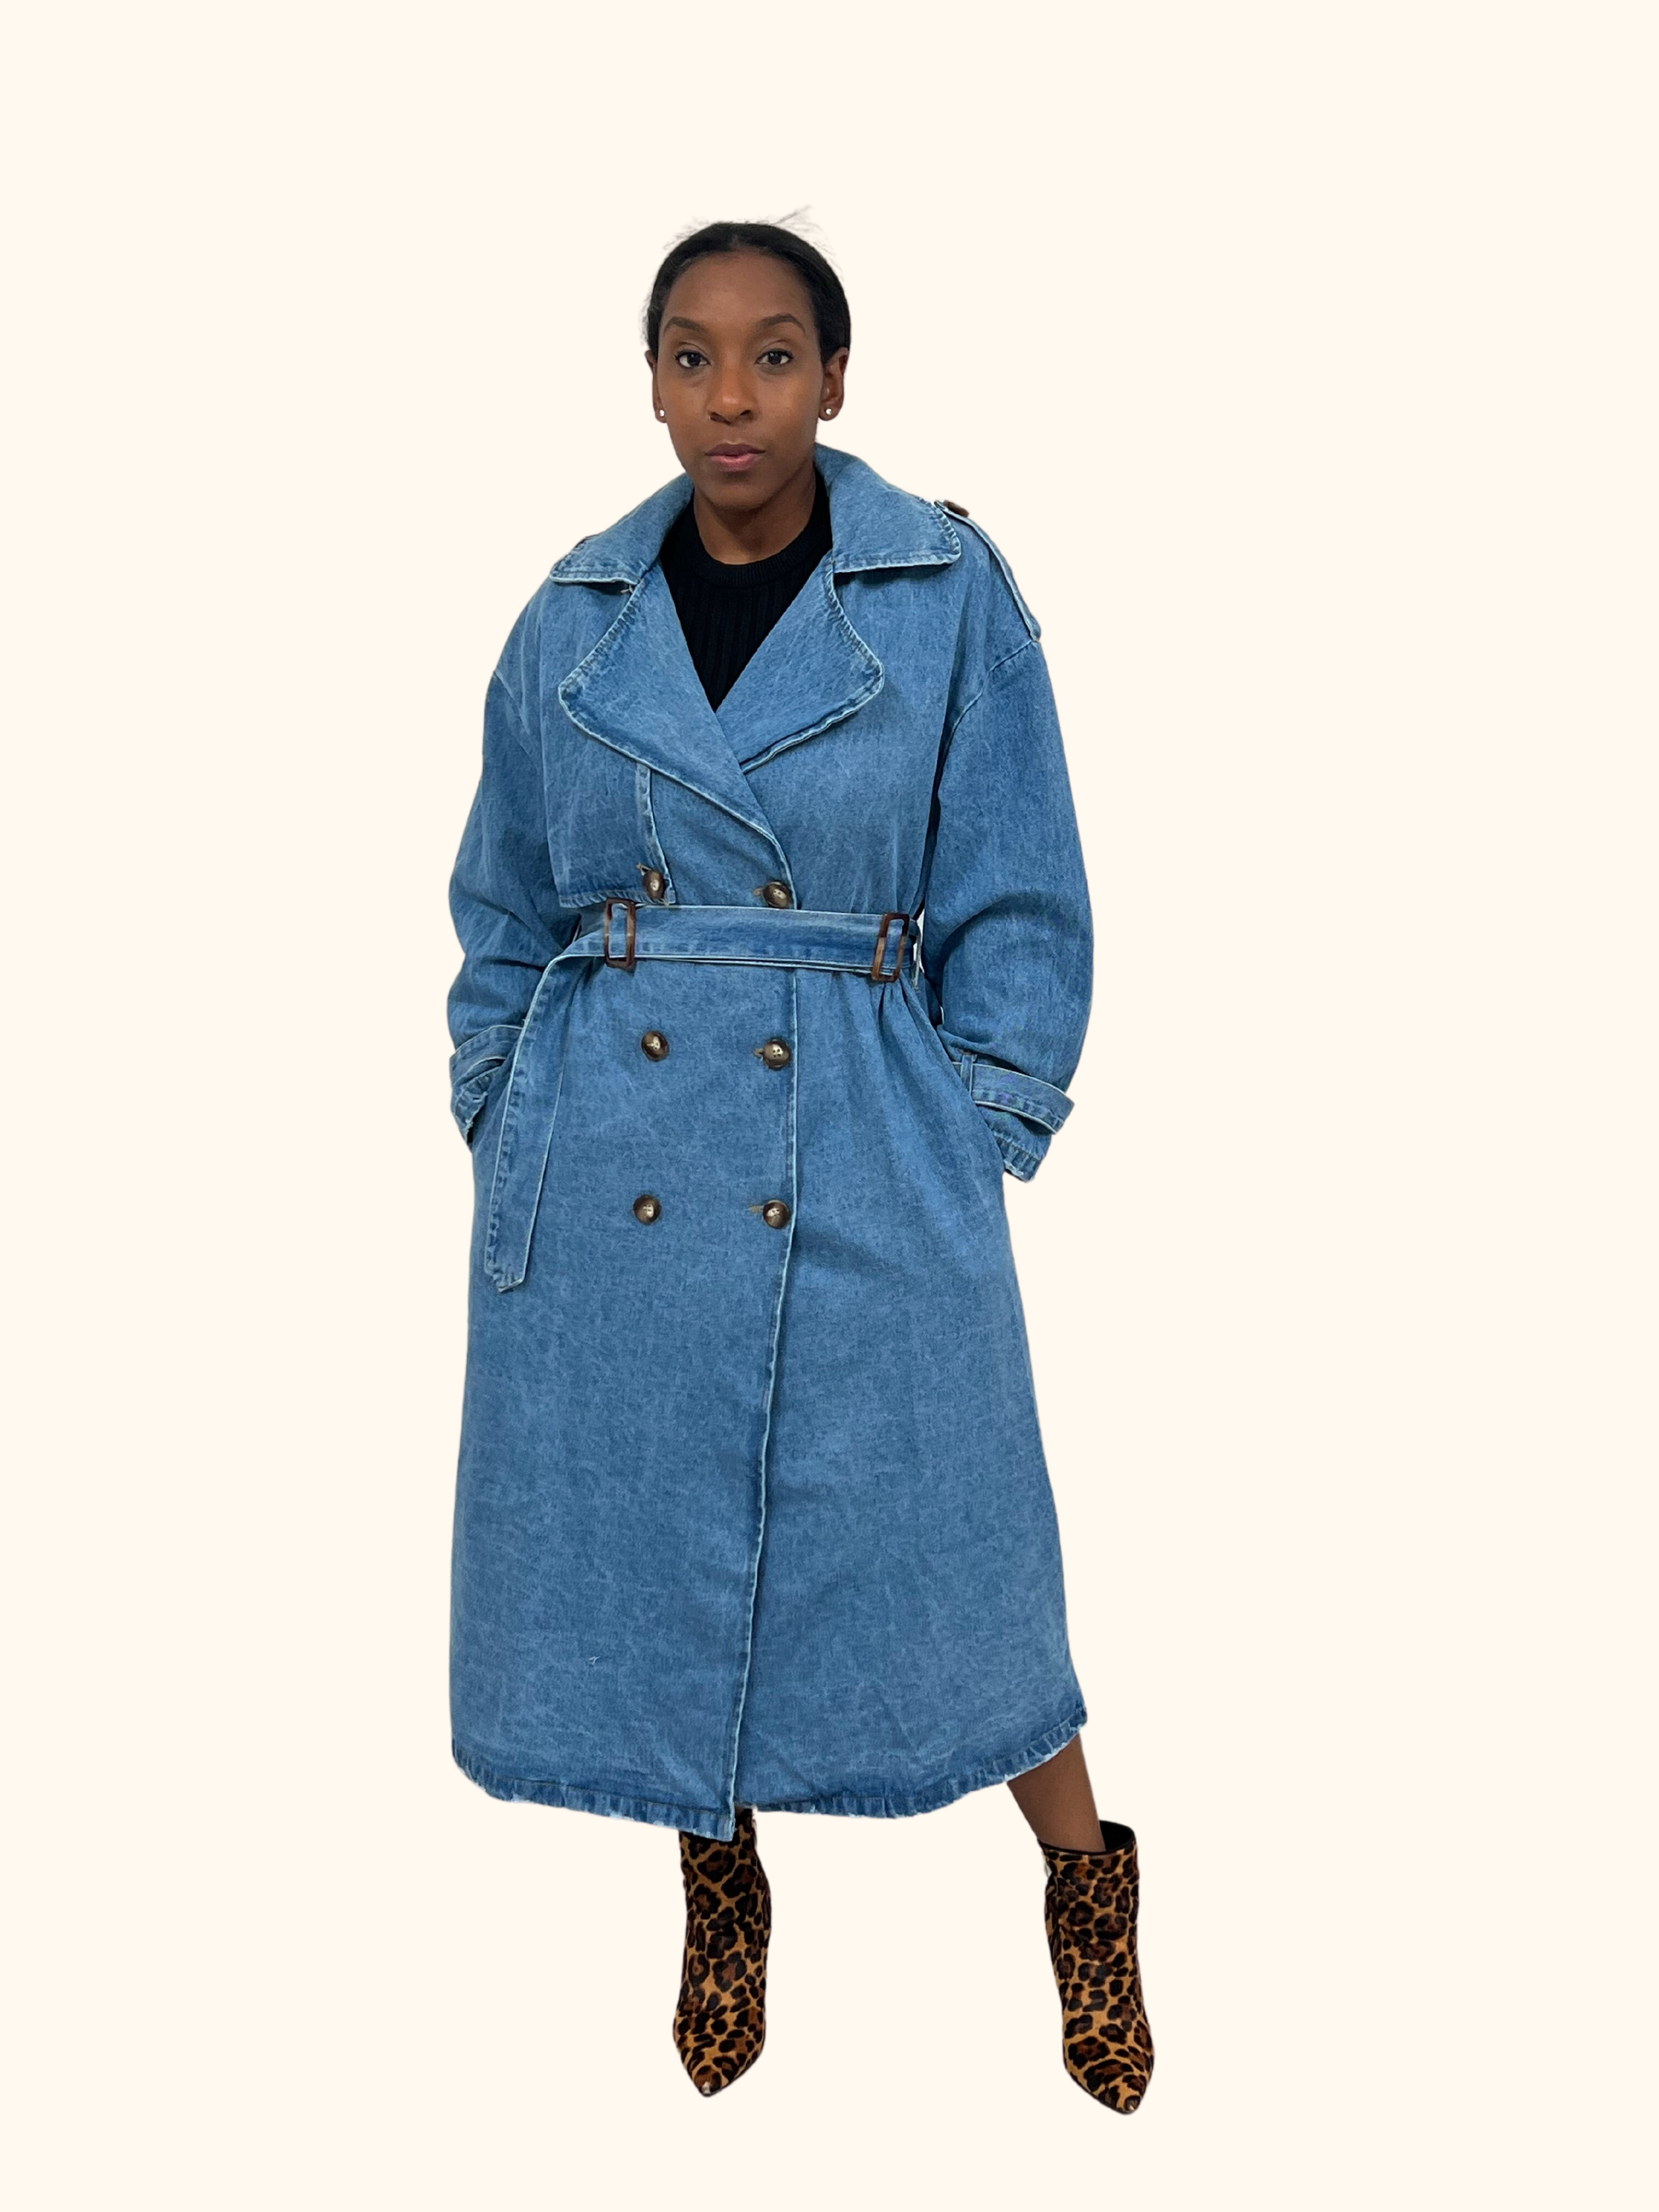 The Carly Jean Trench Coat